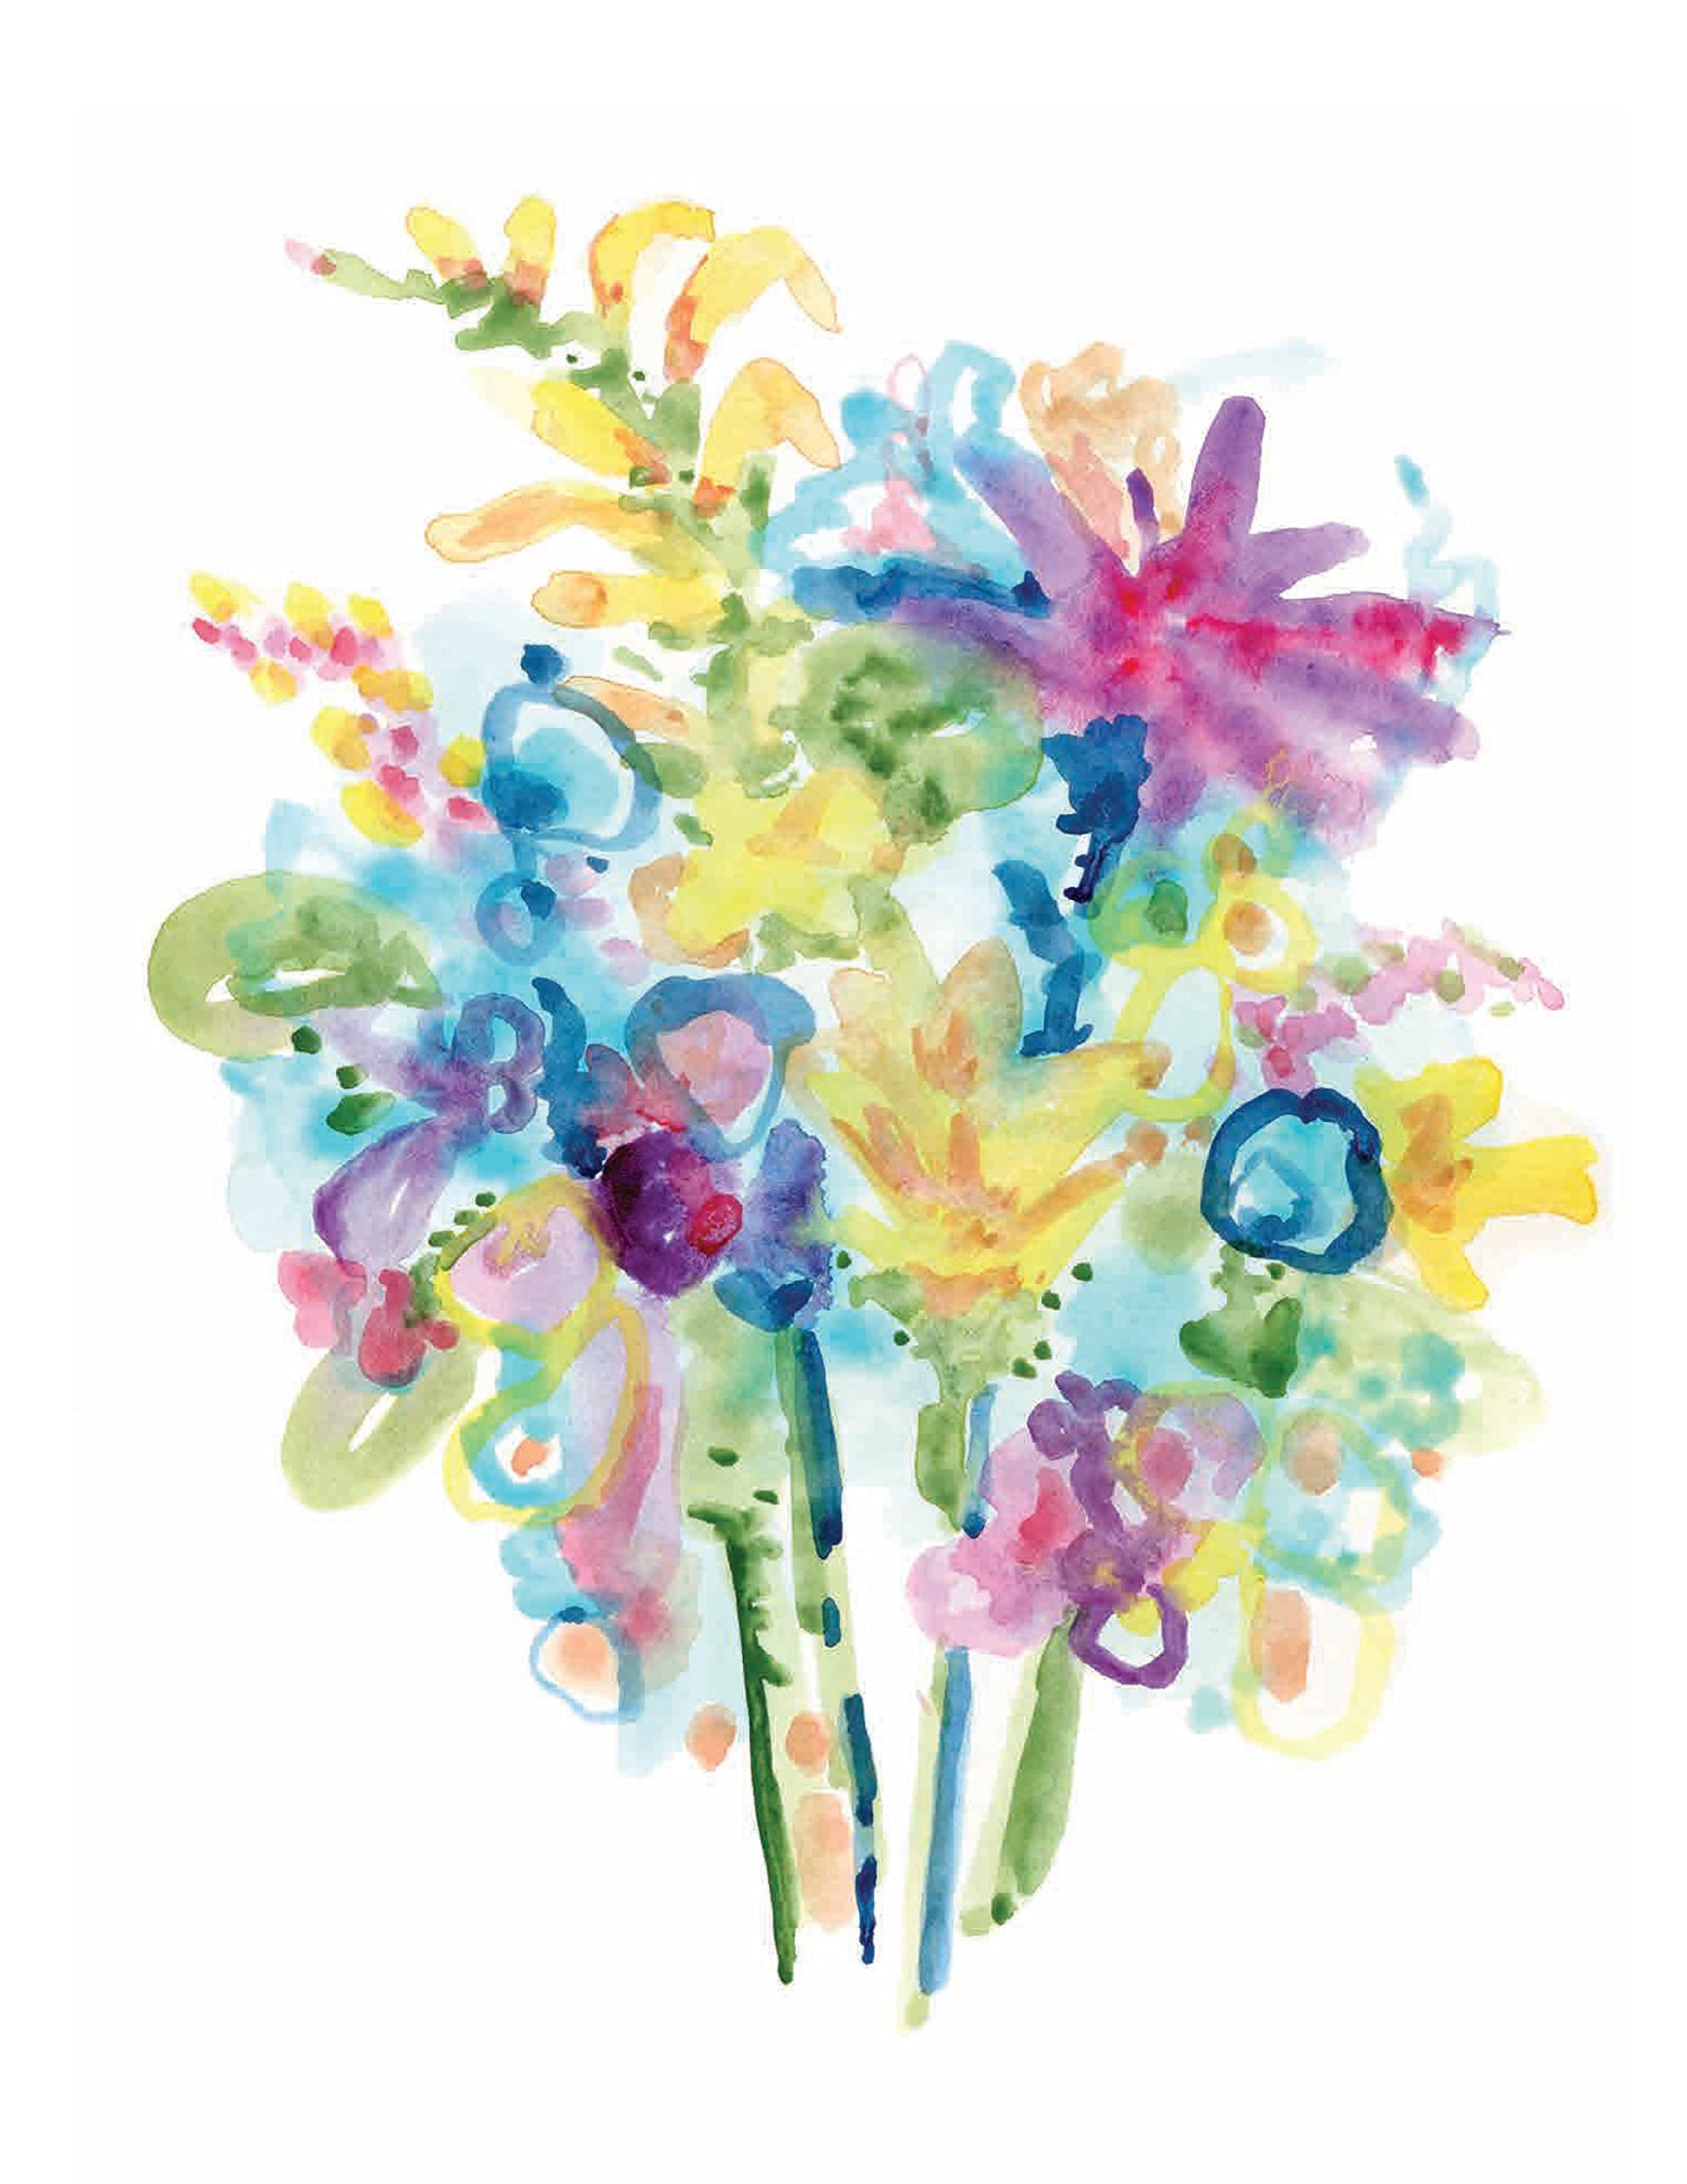 inside page with abstract water color design on bouquet of flowers.